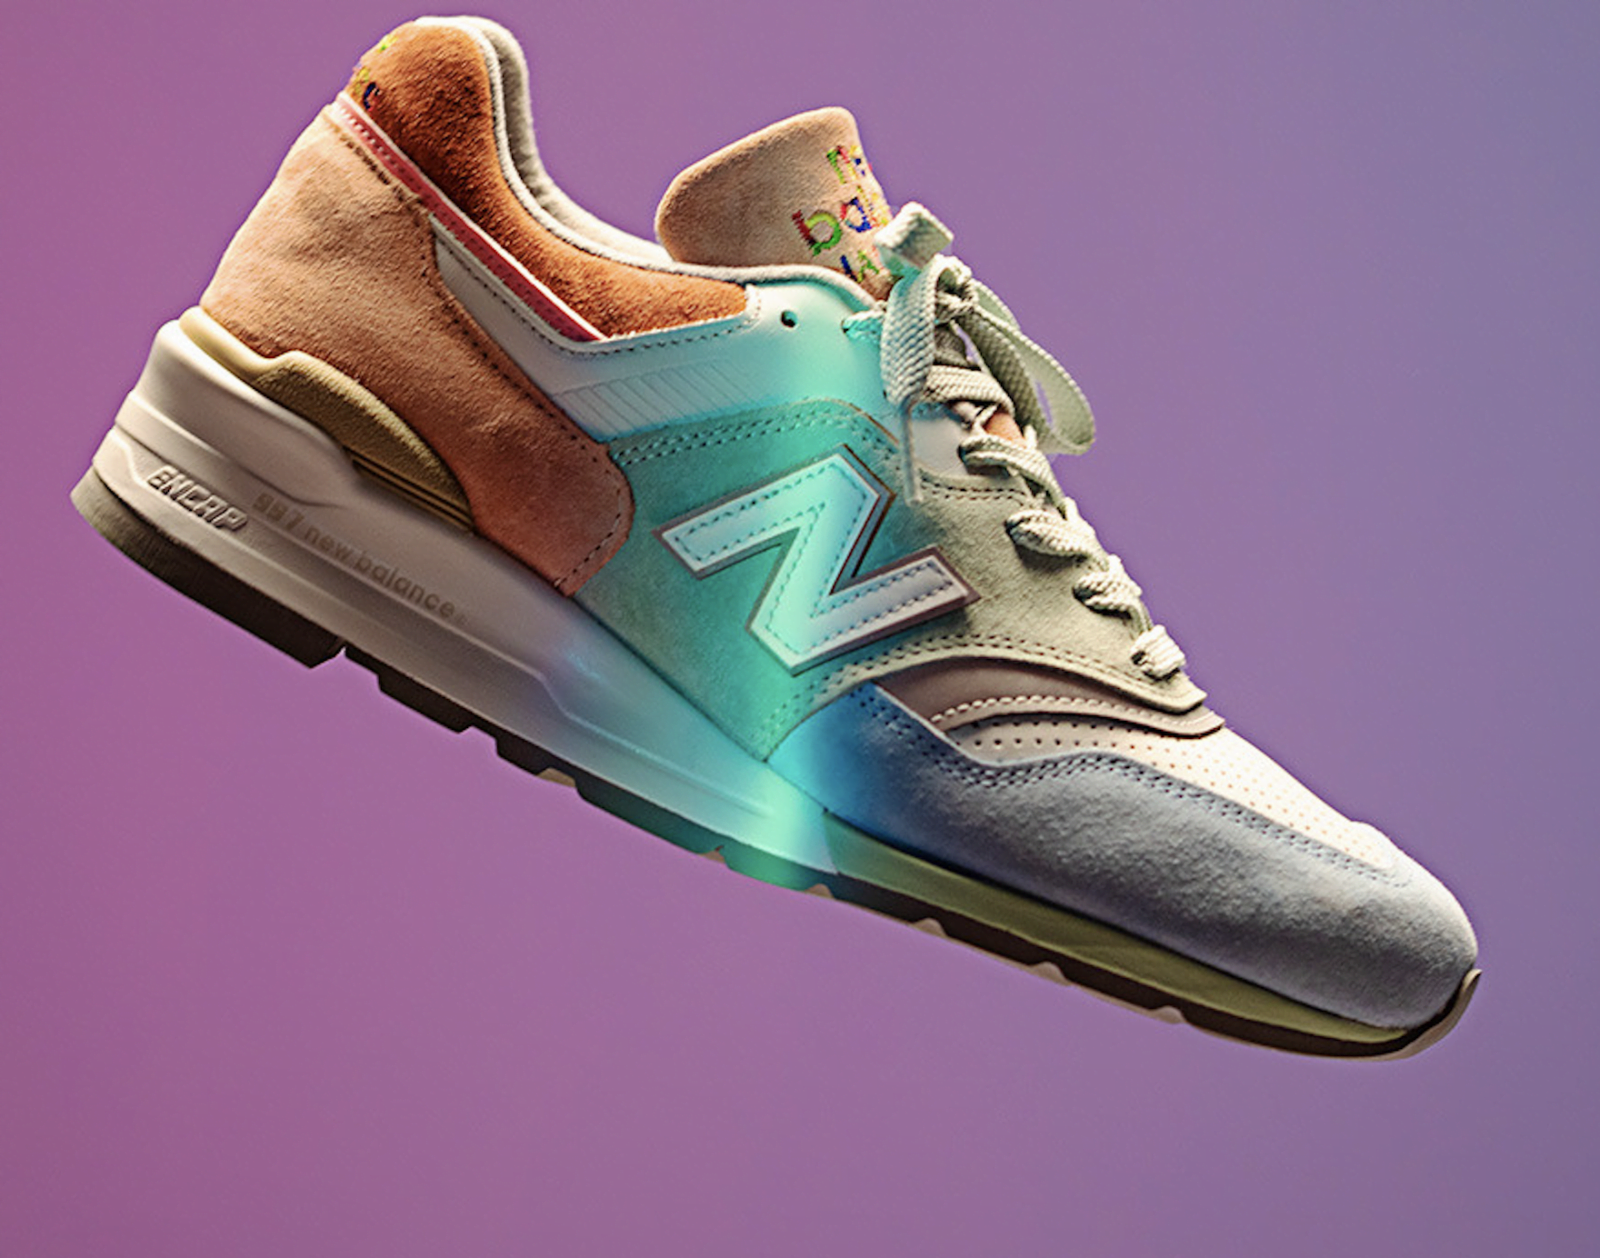 New Balance becomes "giant" The next sport to enter the metaverse